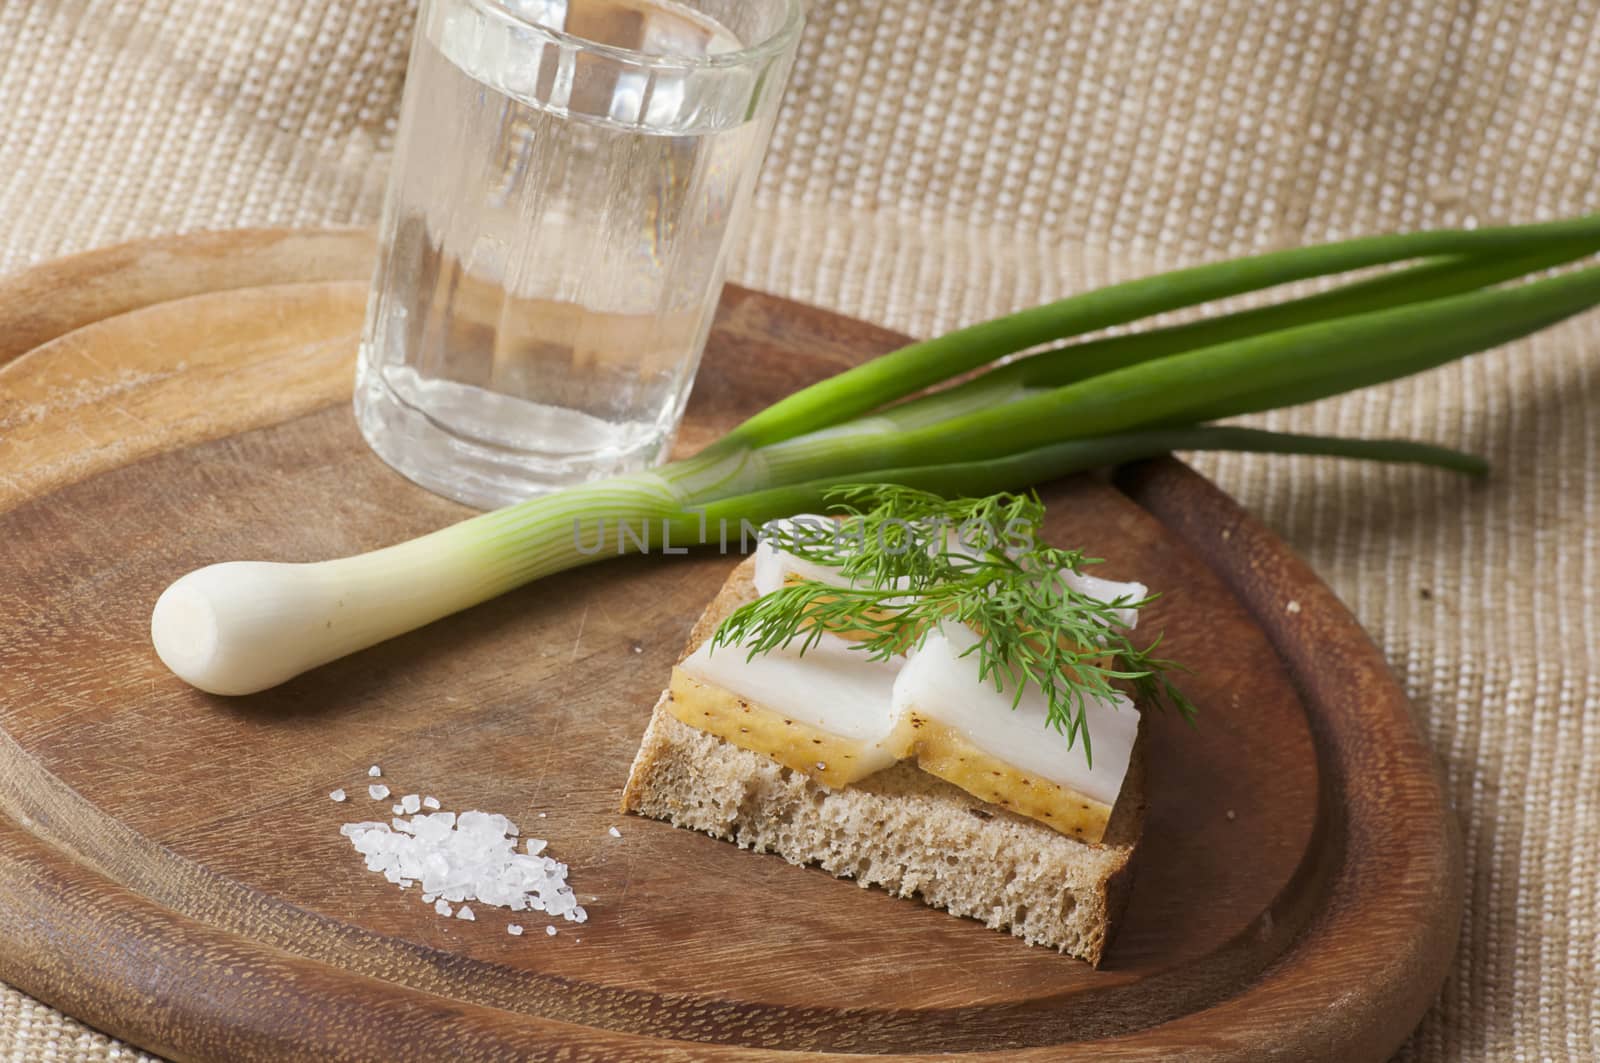 Sandwich with salted lard on rye bread and vodka by dred